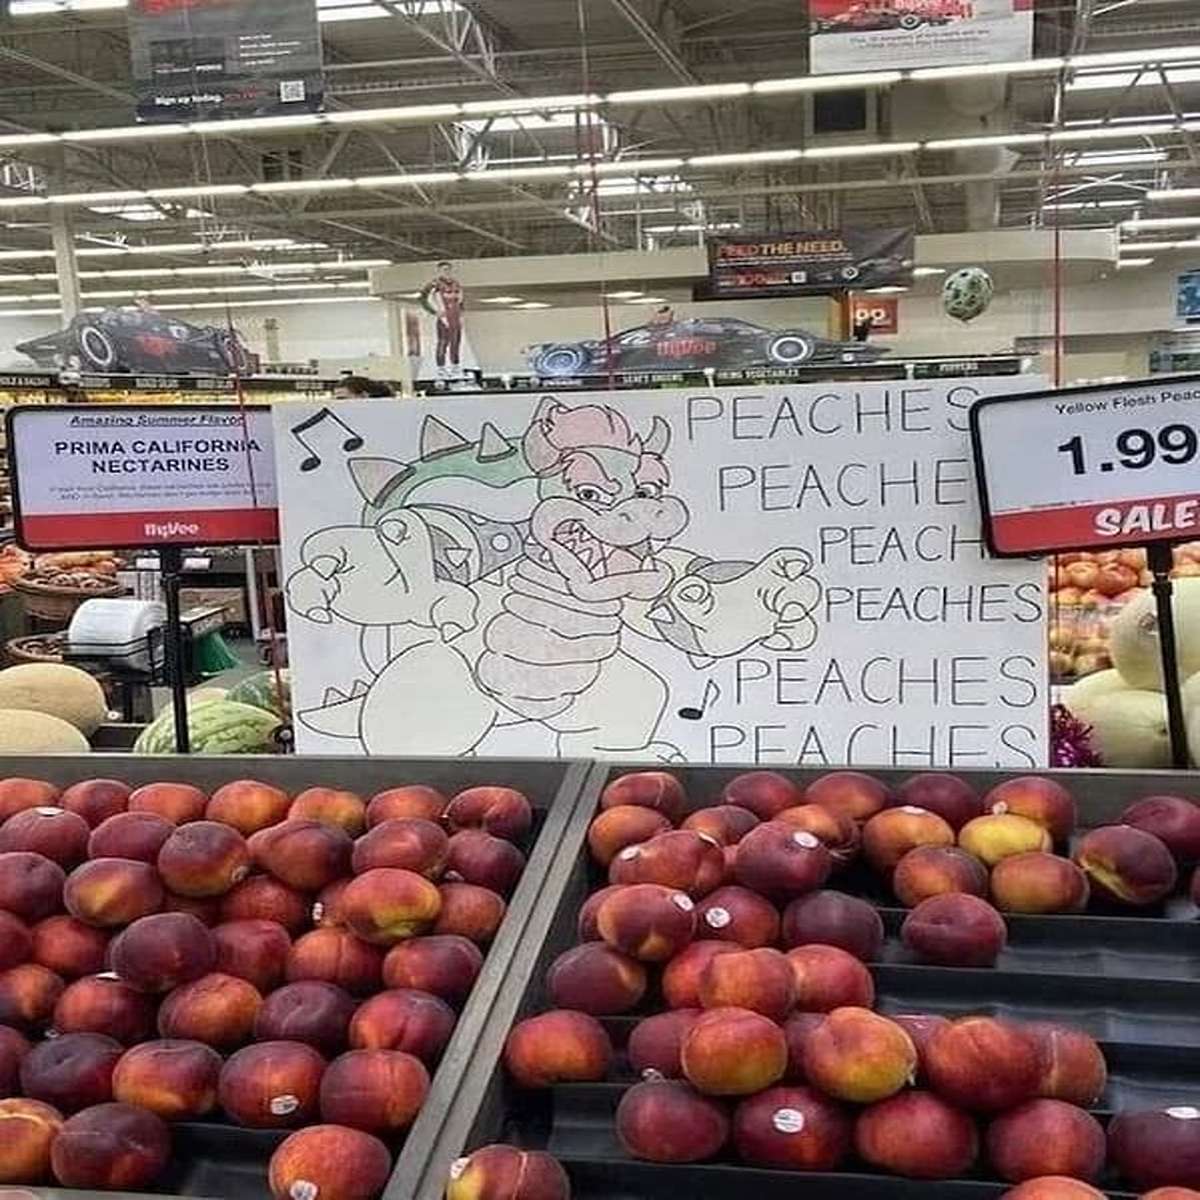 dank memes - natural foods - Cleesams Amazing Sueminese Flavor Prima California Nectarines HvDee thi Vor Teseact Angling Pred The Need, 99 911 Fiffers Peaches Peache Peach Peaches Peaches Peaches Yellow Flosts Peac 1.99 Sale